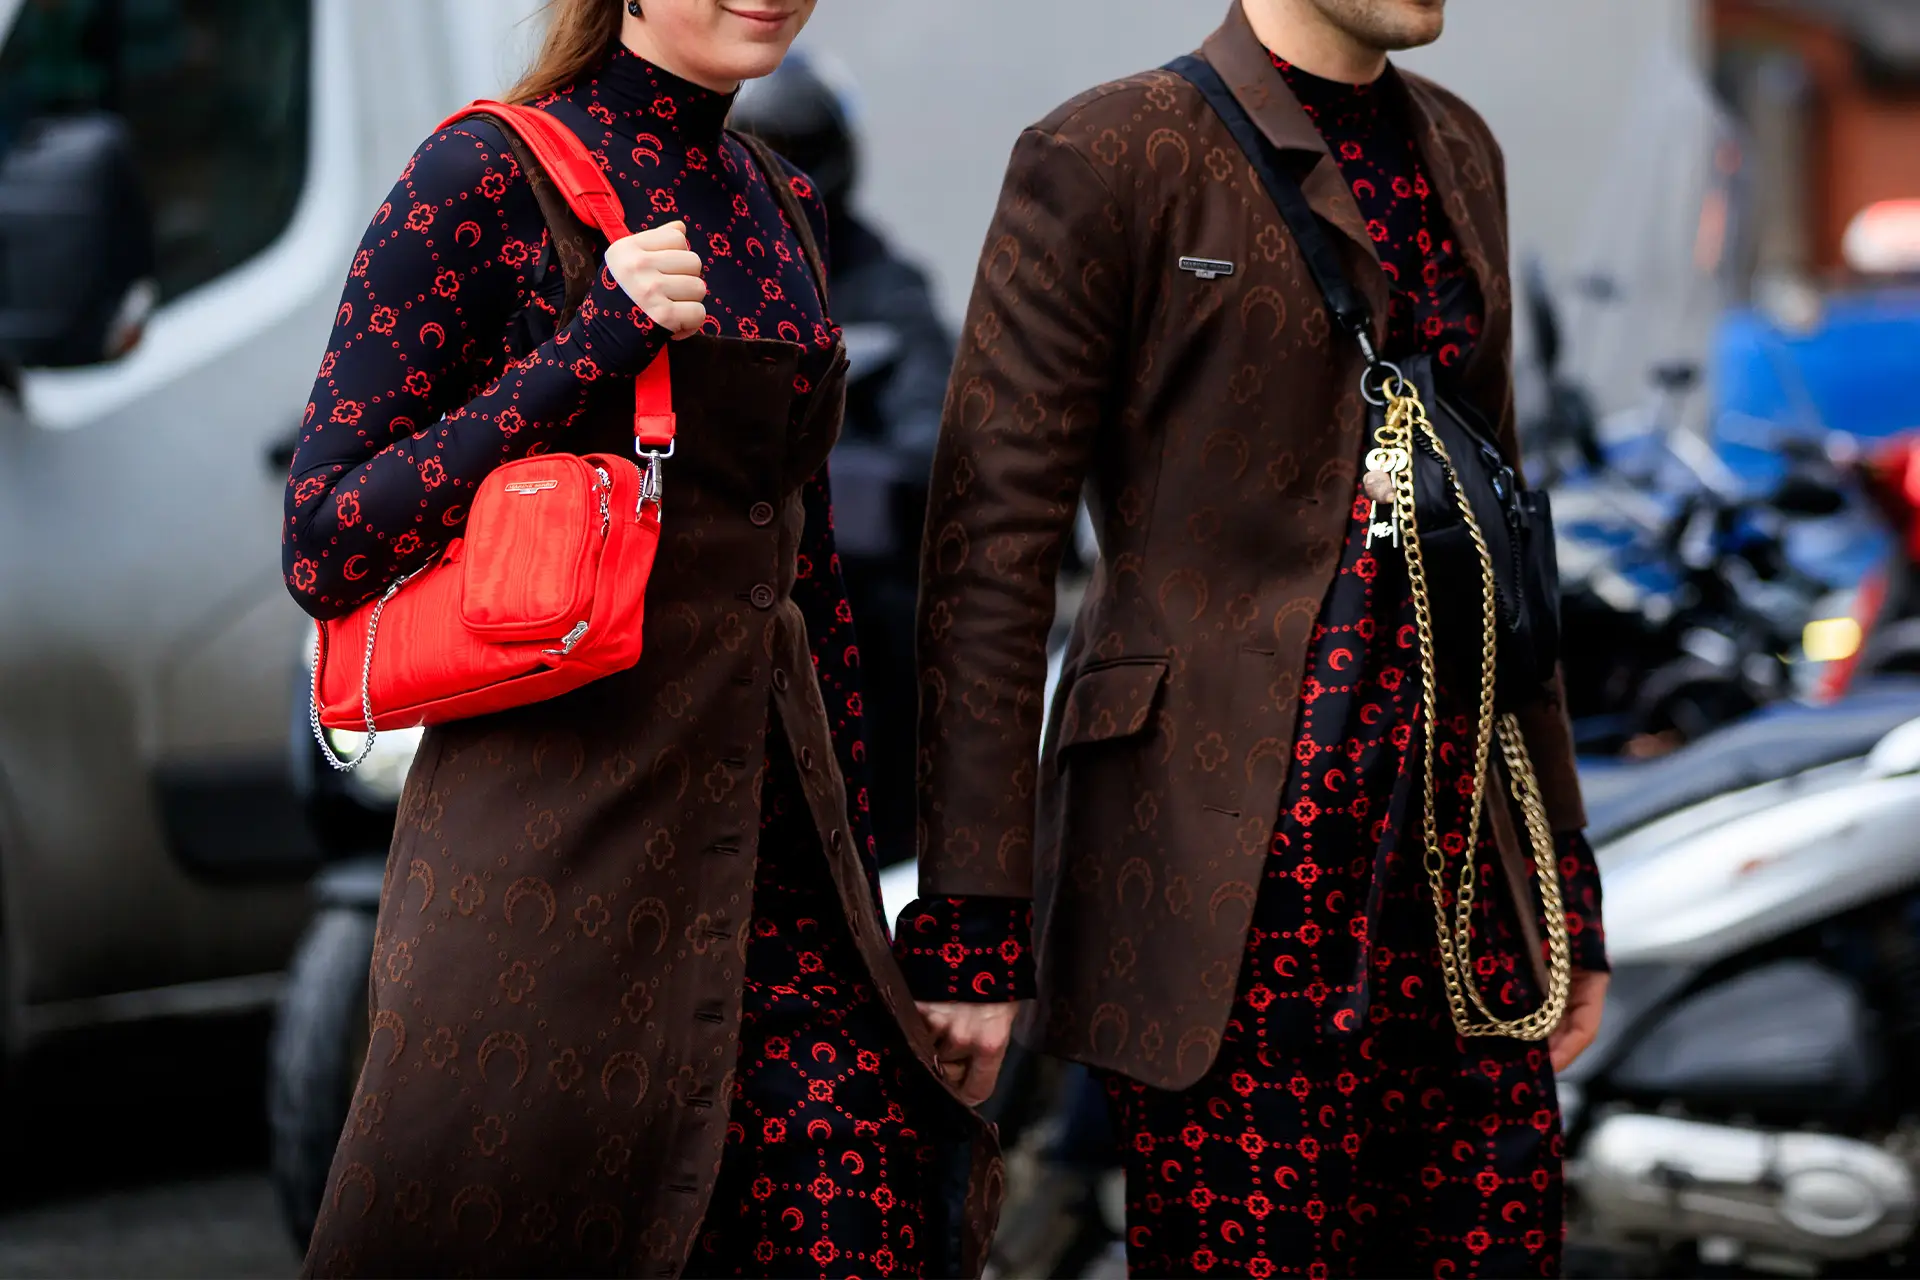 man-and-woman-luxury-clothes.jpg